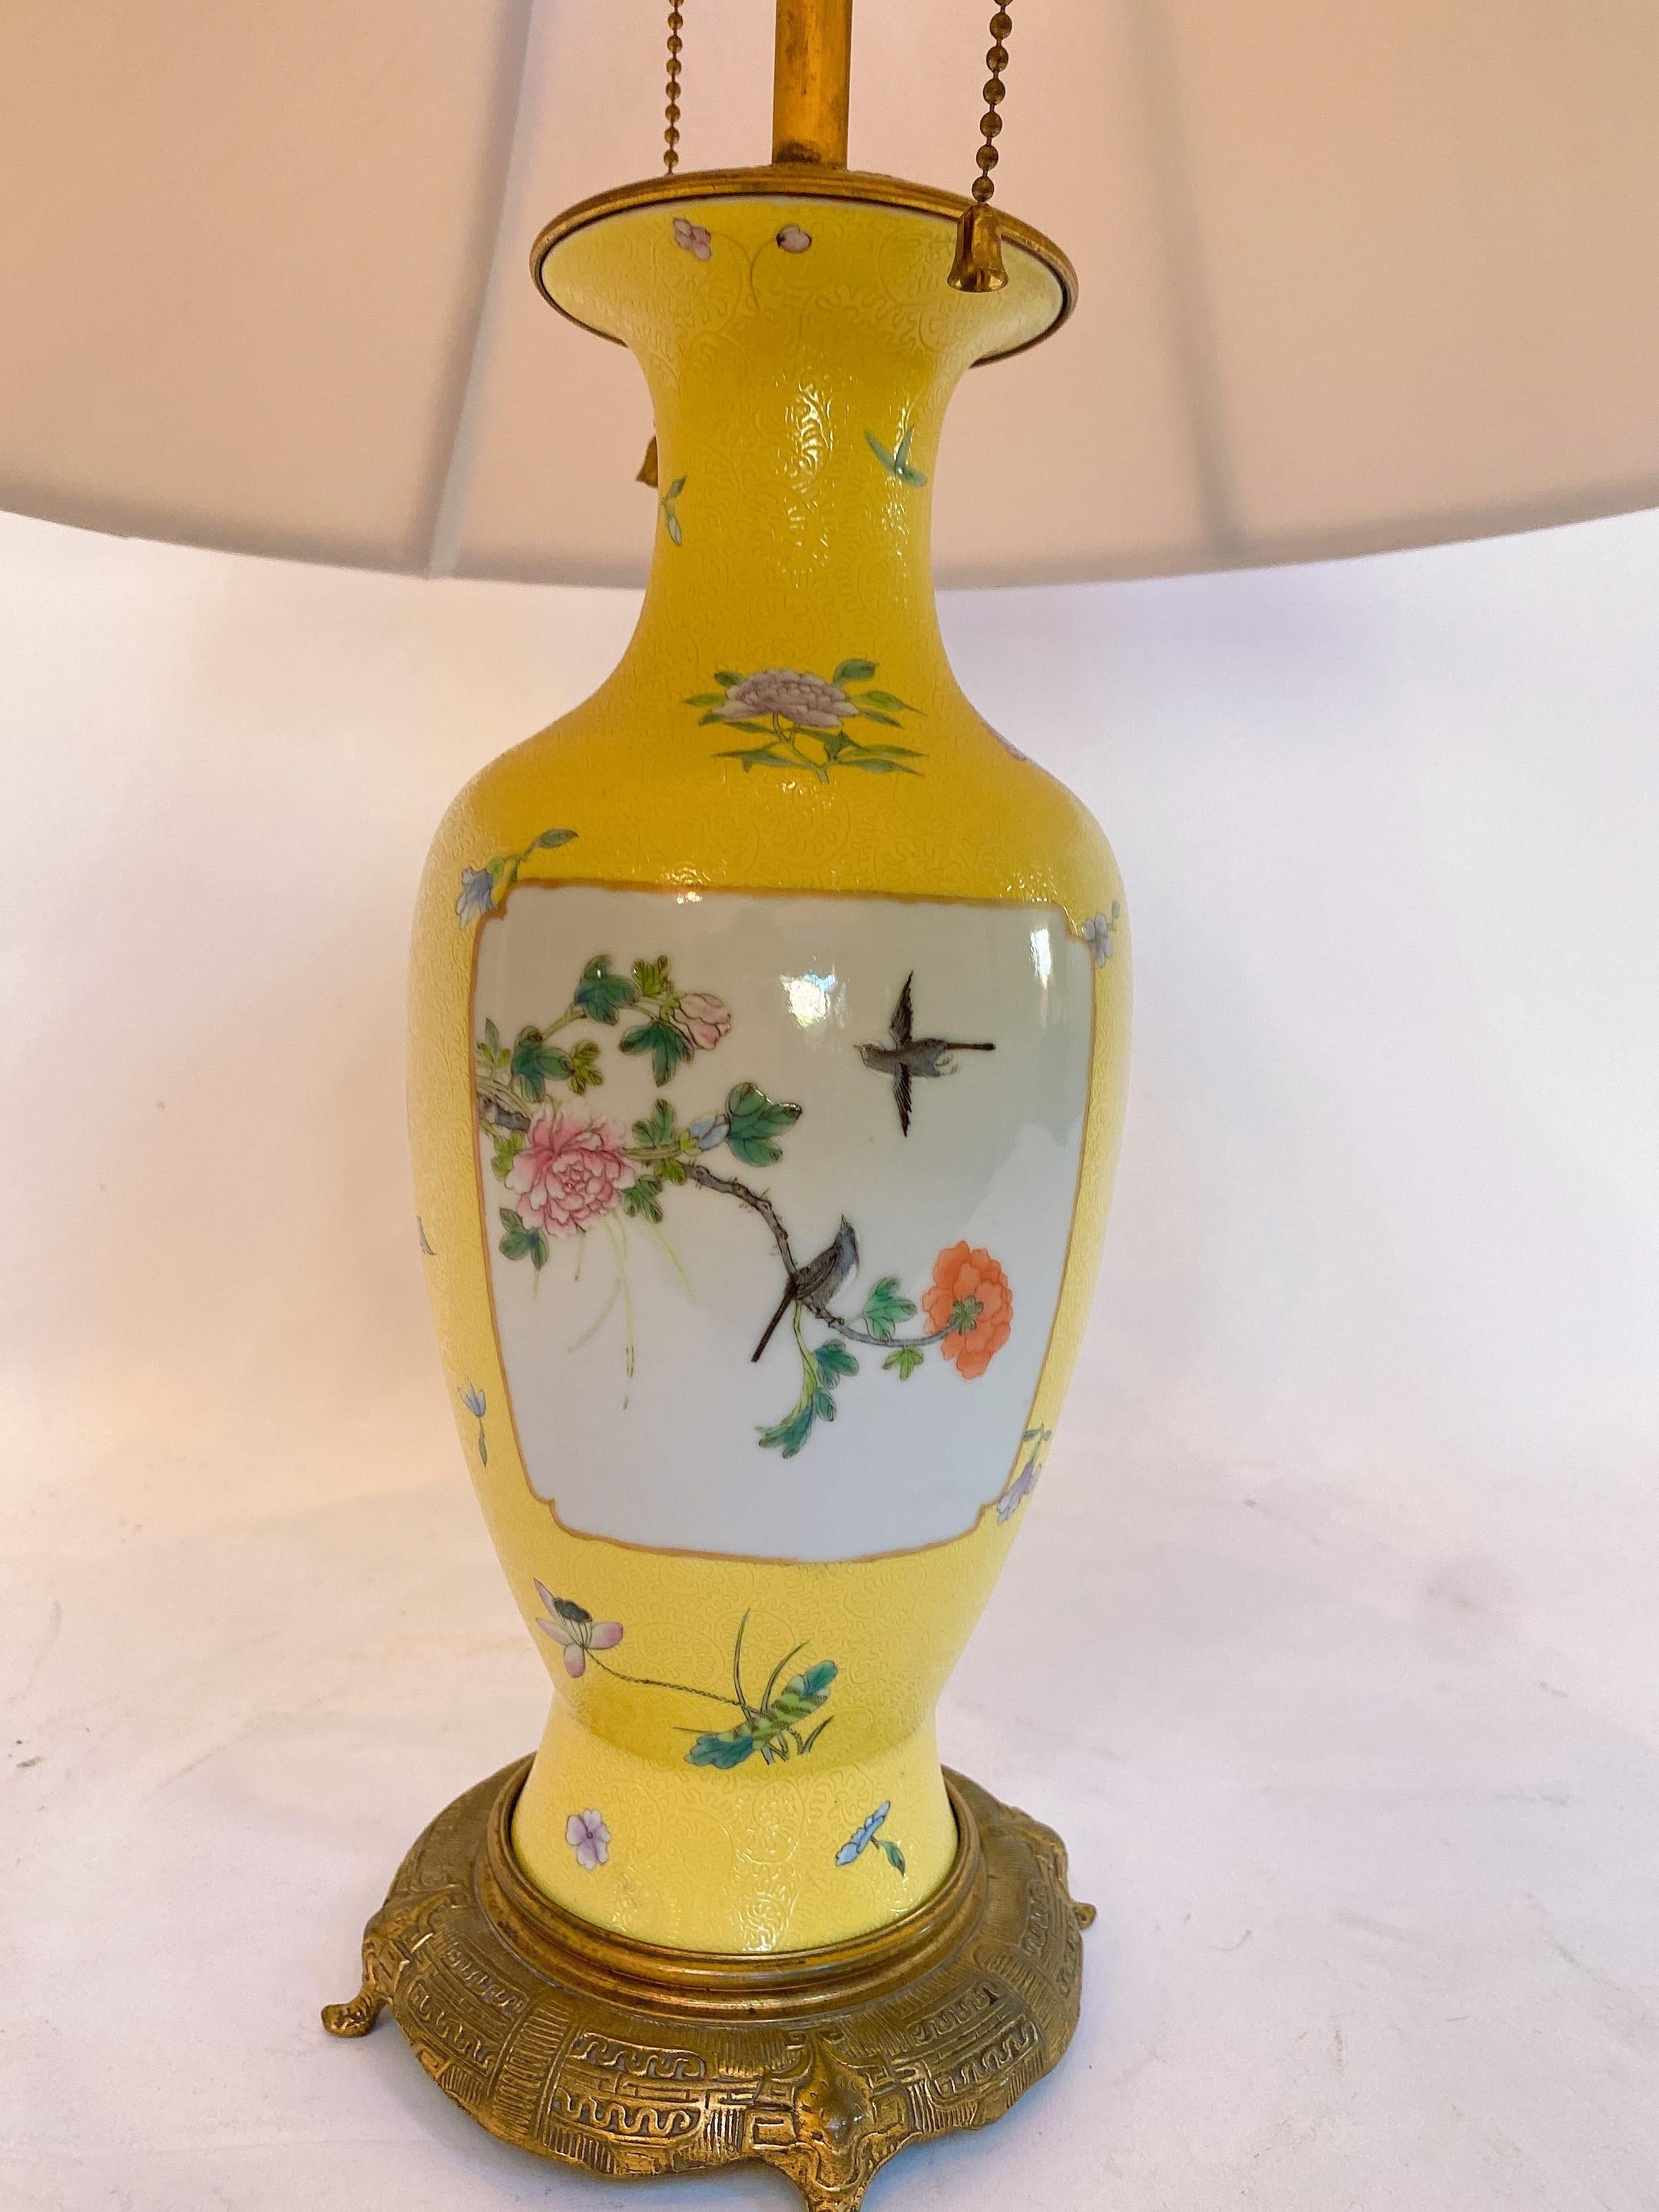 Qing Dynasty Rare Chinese Famille Rose Porcelain Vase Yellow Ground Enamel Panel In Good Condition For Sale In Brea, CA